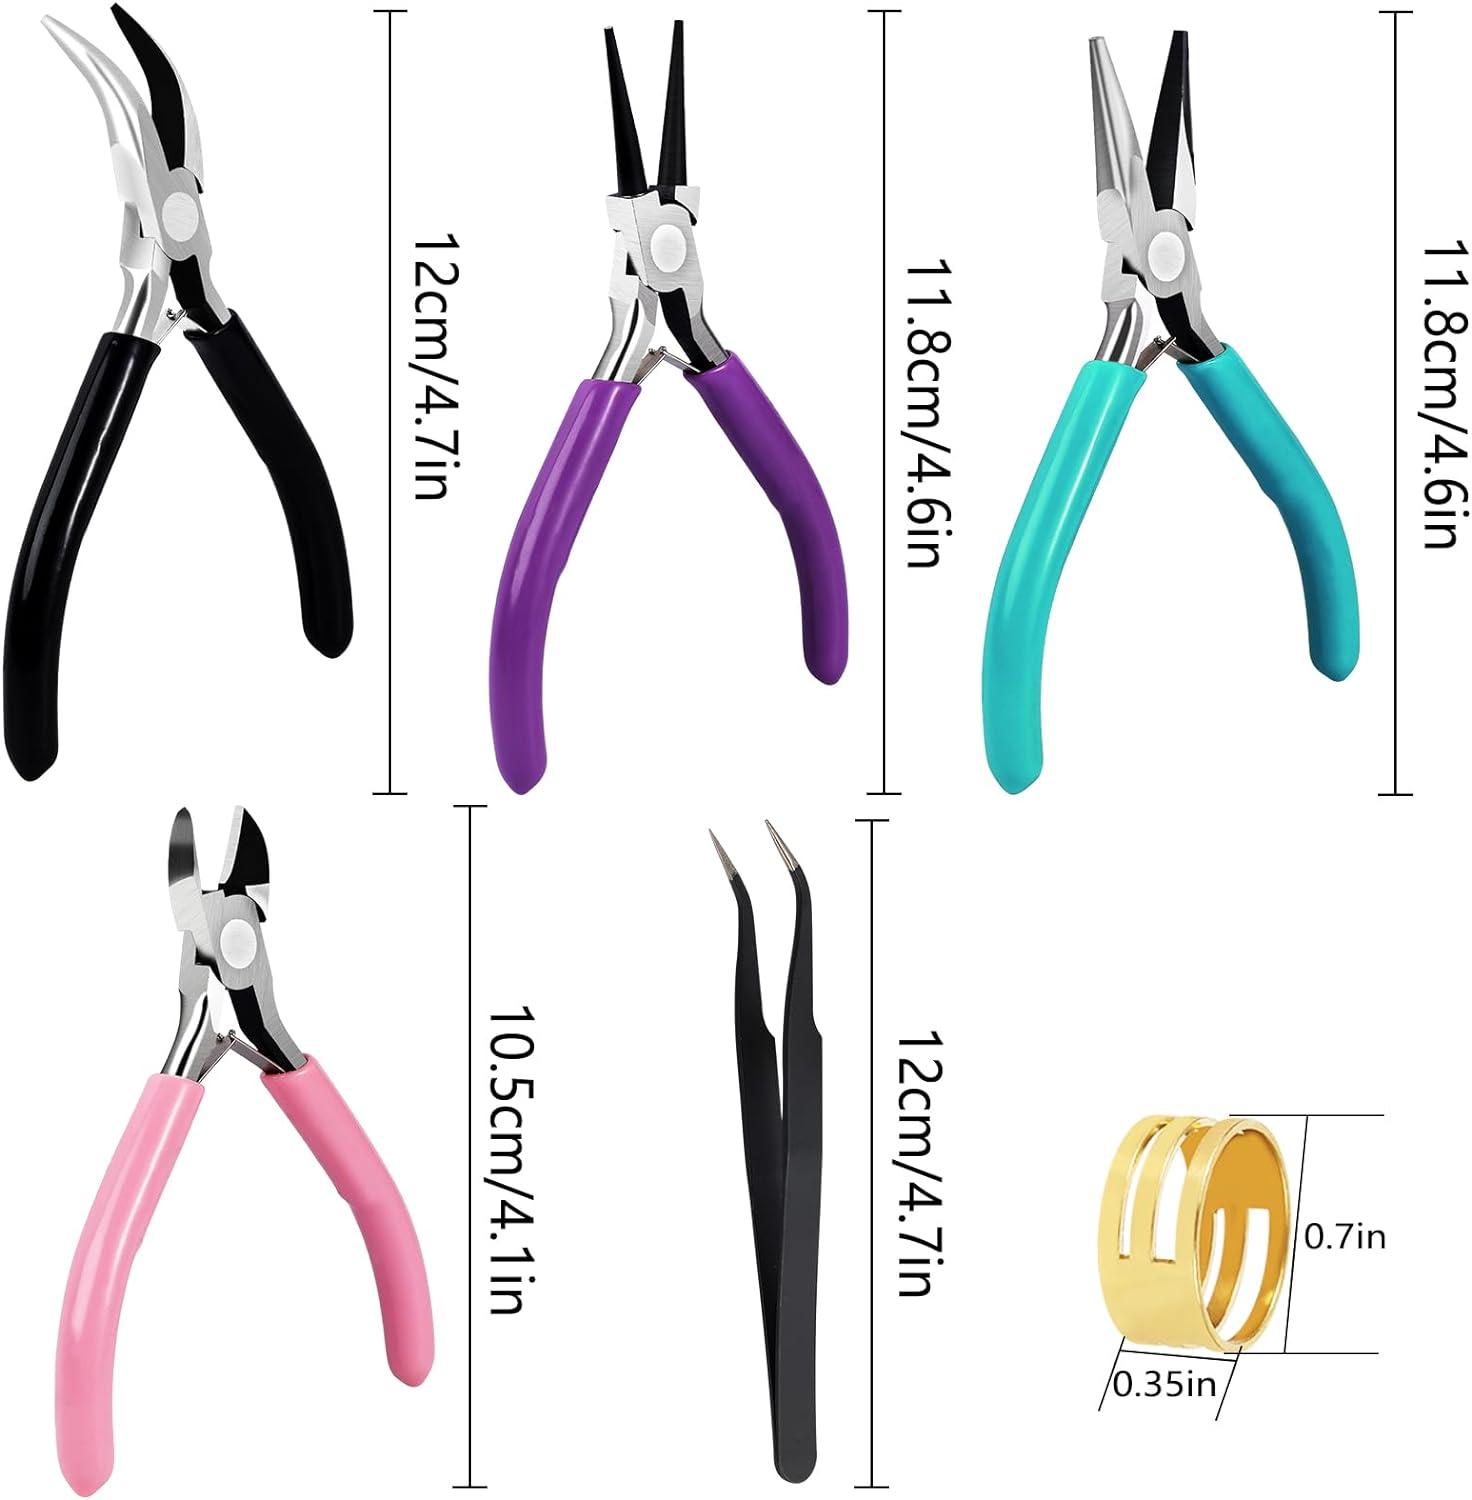 Swpeet 6Pcs 6 Types 4.5 Inch Jewelry Pliers Set, Colorful Jewelry Making  Tools Needle Nose Pliers Round Nose Pliers Wire Cutters, Crimping Pliers  Bent